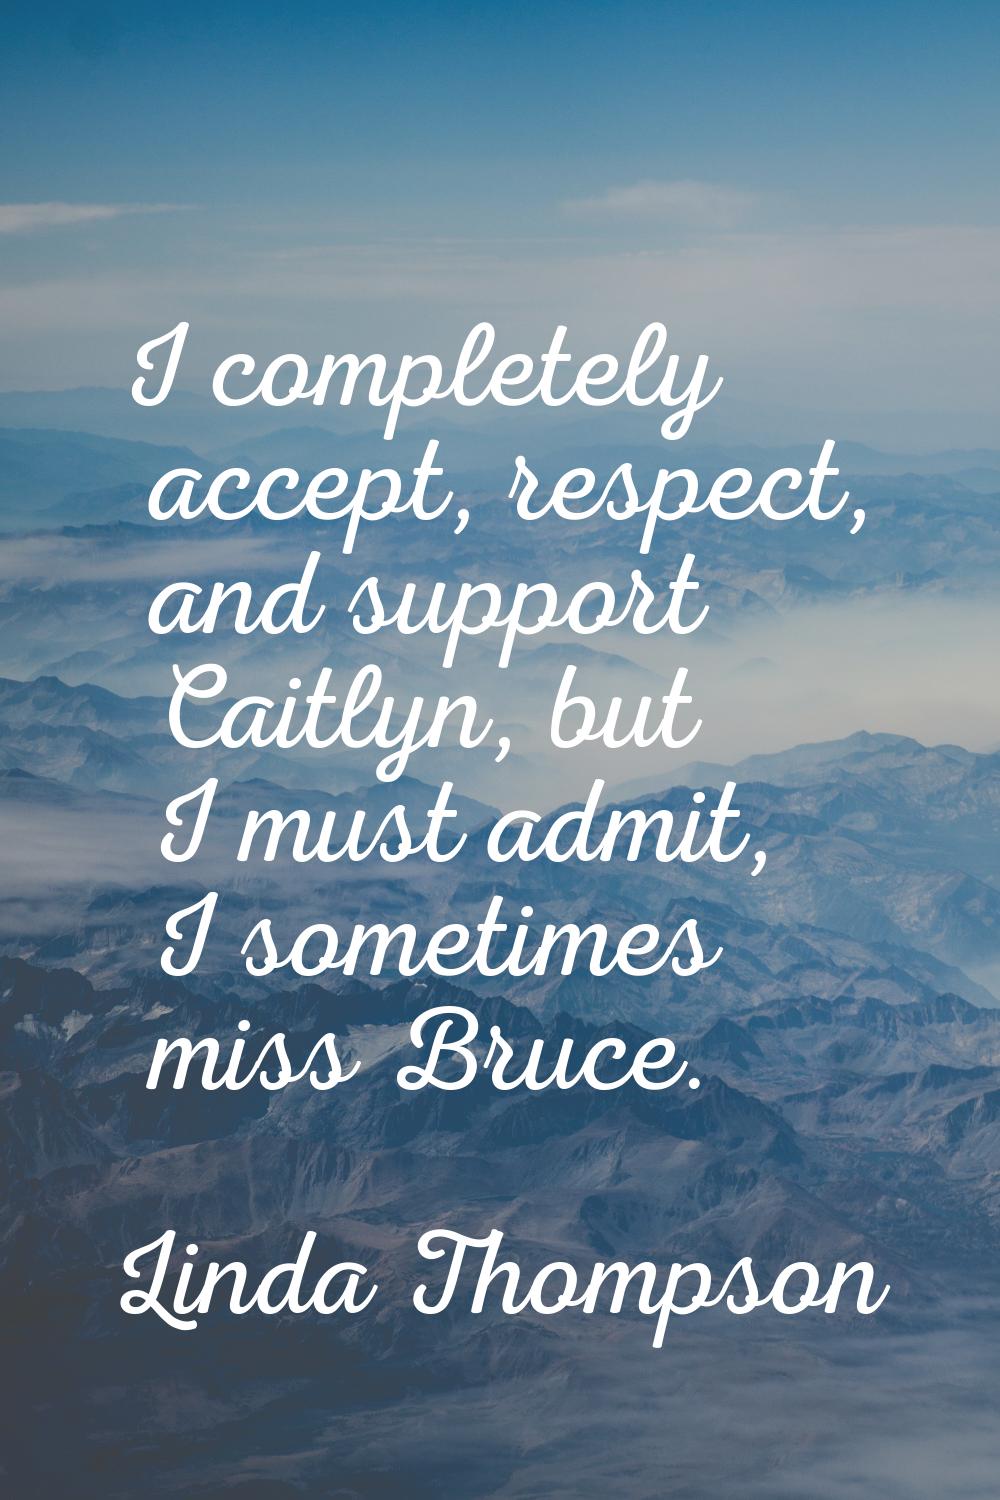 I completely accept, respect, and support Caitlyn, but I must admit, I sometimes miss Bruce.